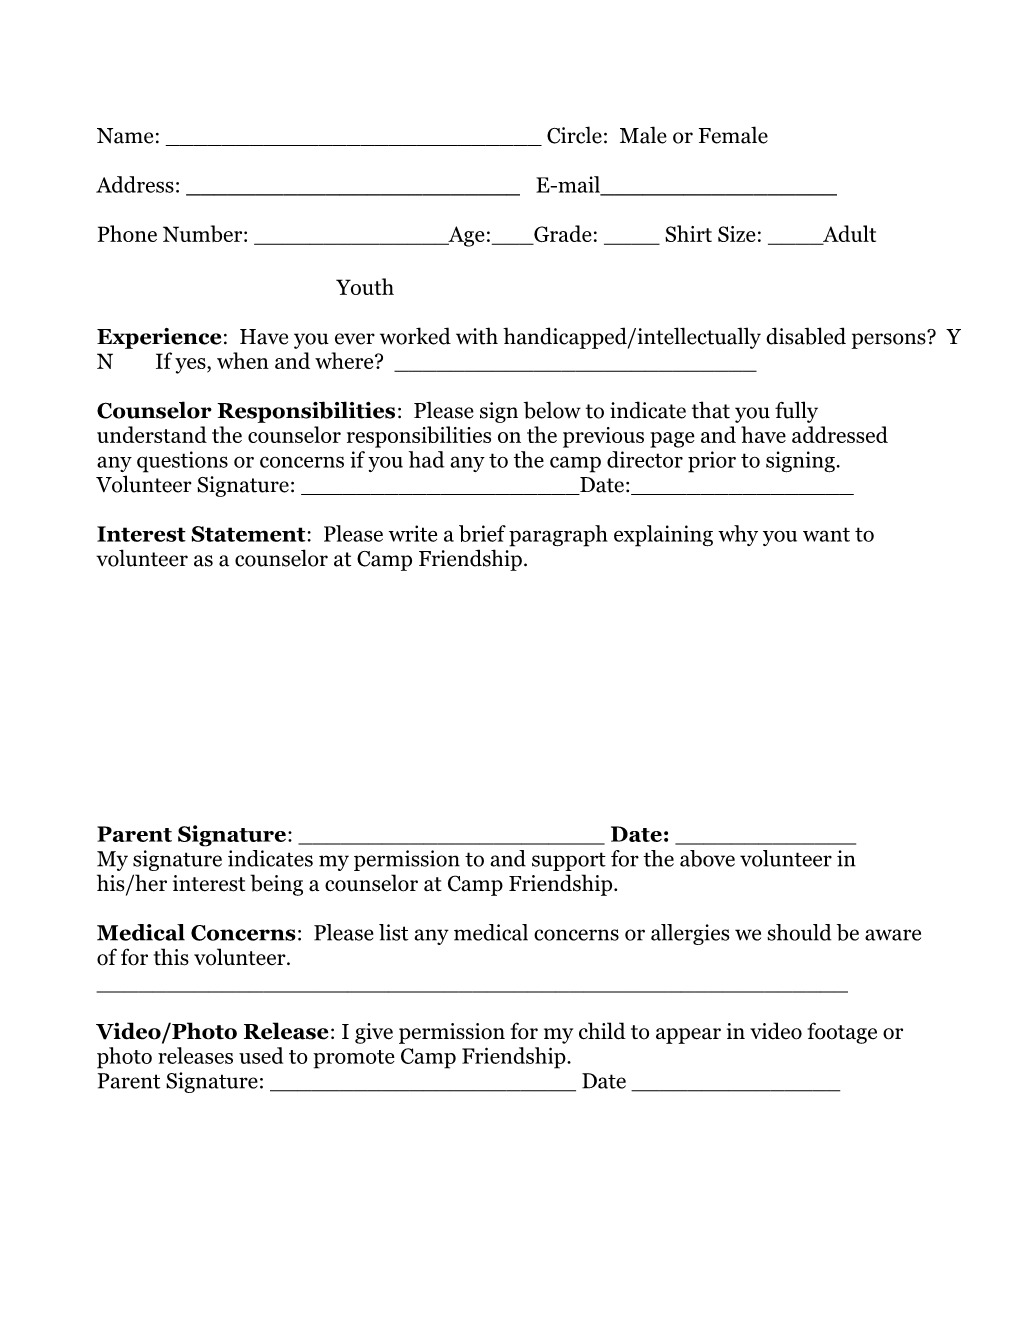 Camp Friendship 2015 Counselor Application